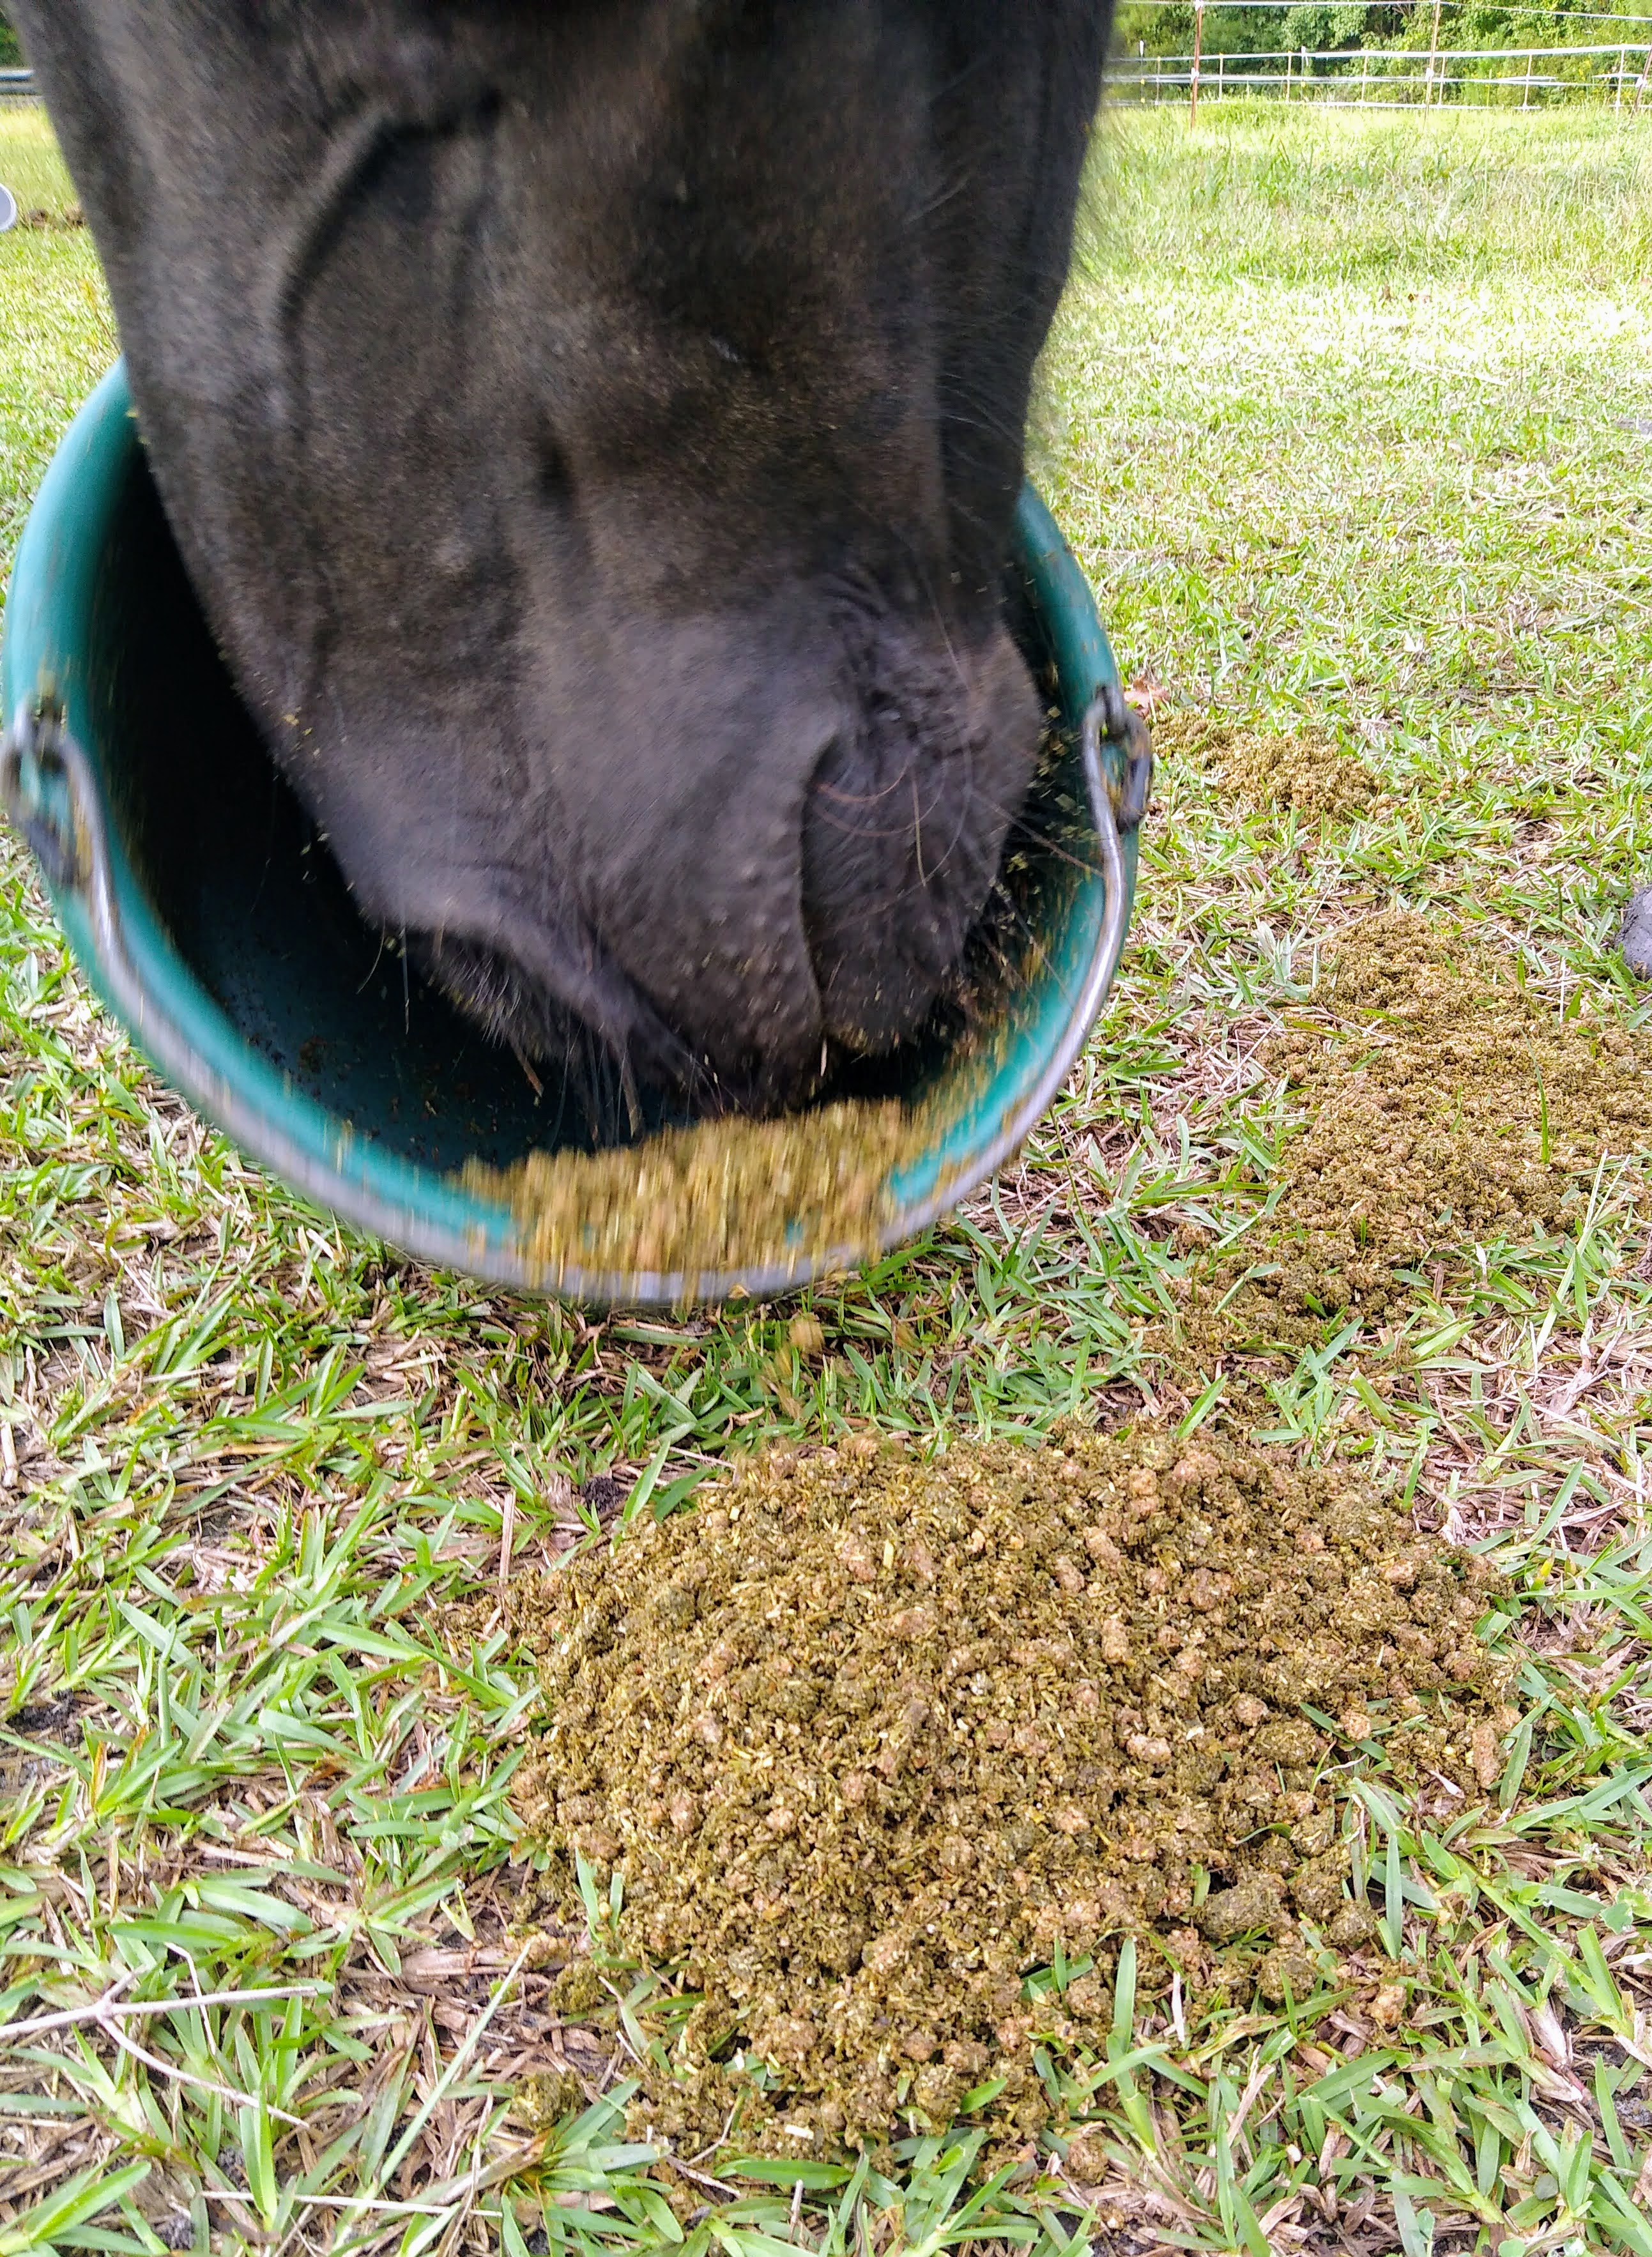 A horse's nose and mouth in the act of pushing feed out of a feed bucket. Spilled feed surrounds the bucket.